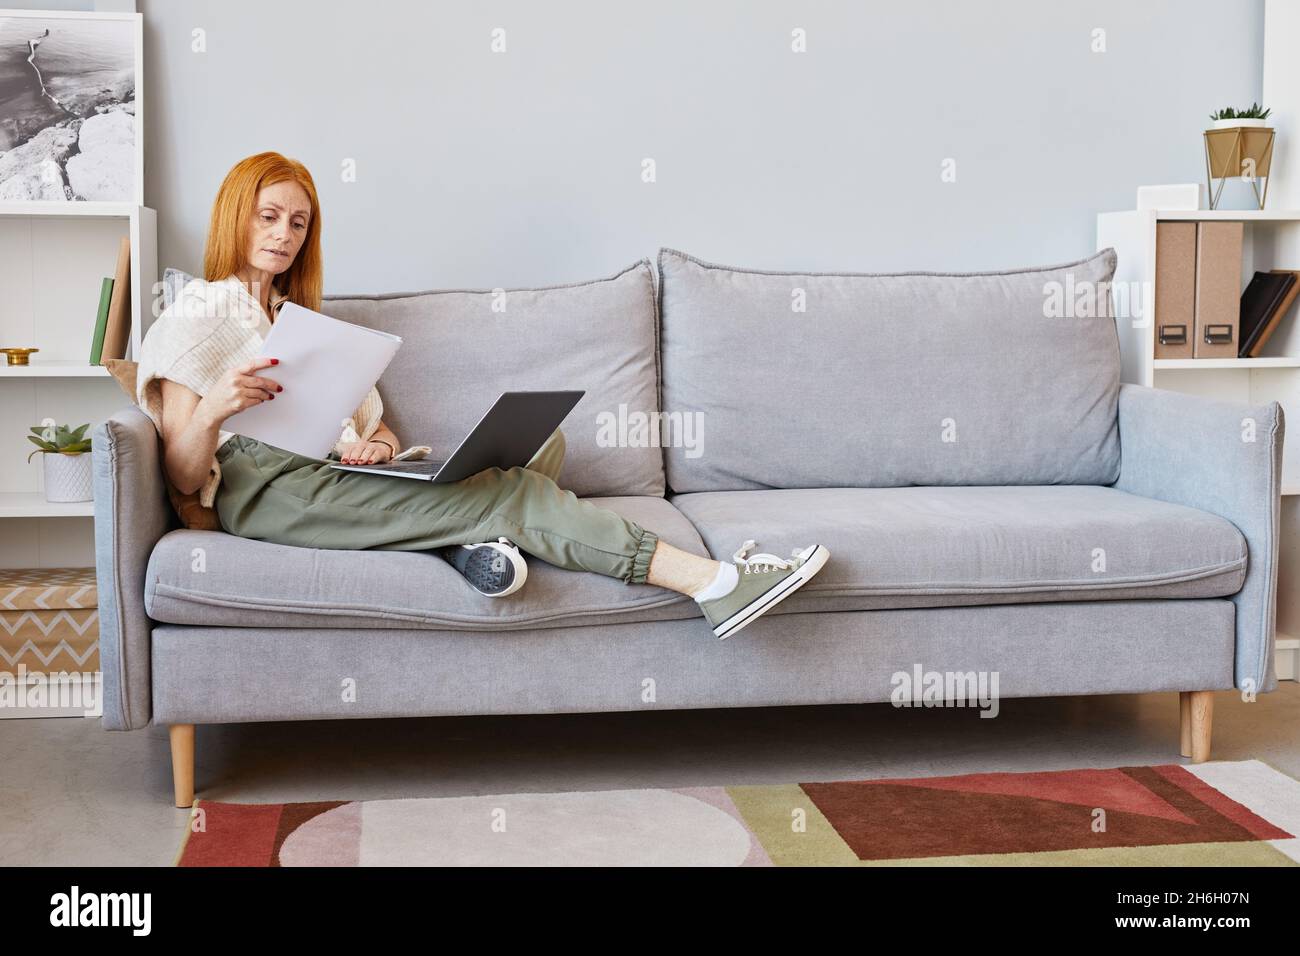 Full length portrait of adult red haired woman using laptop on sofa while working from home, copy space Stock Photo